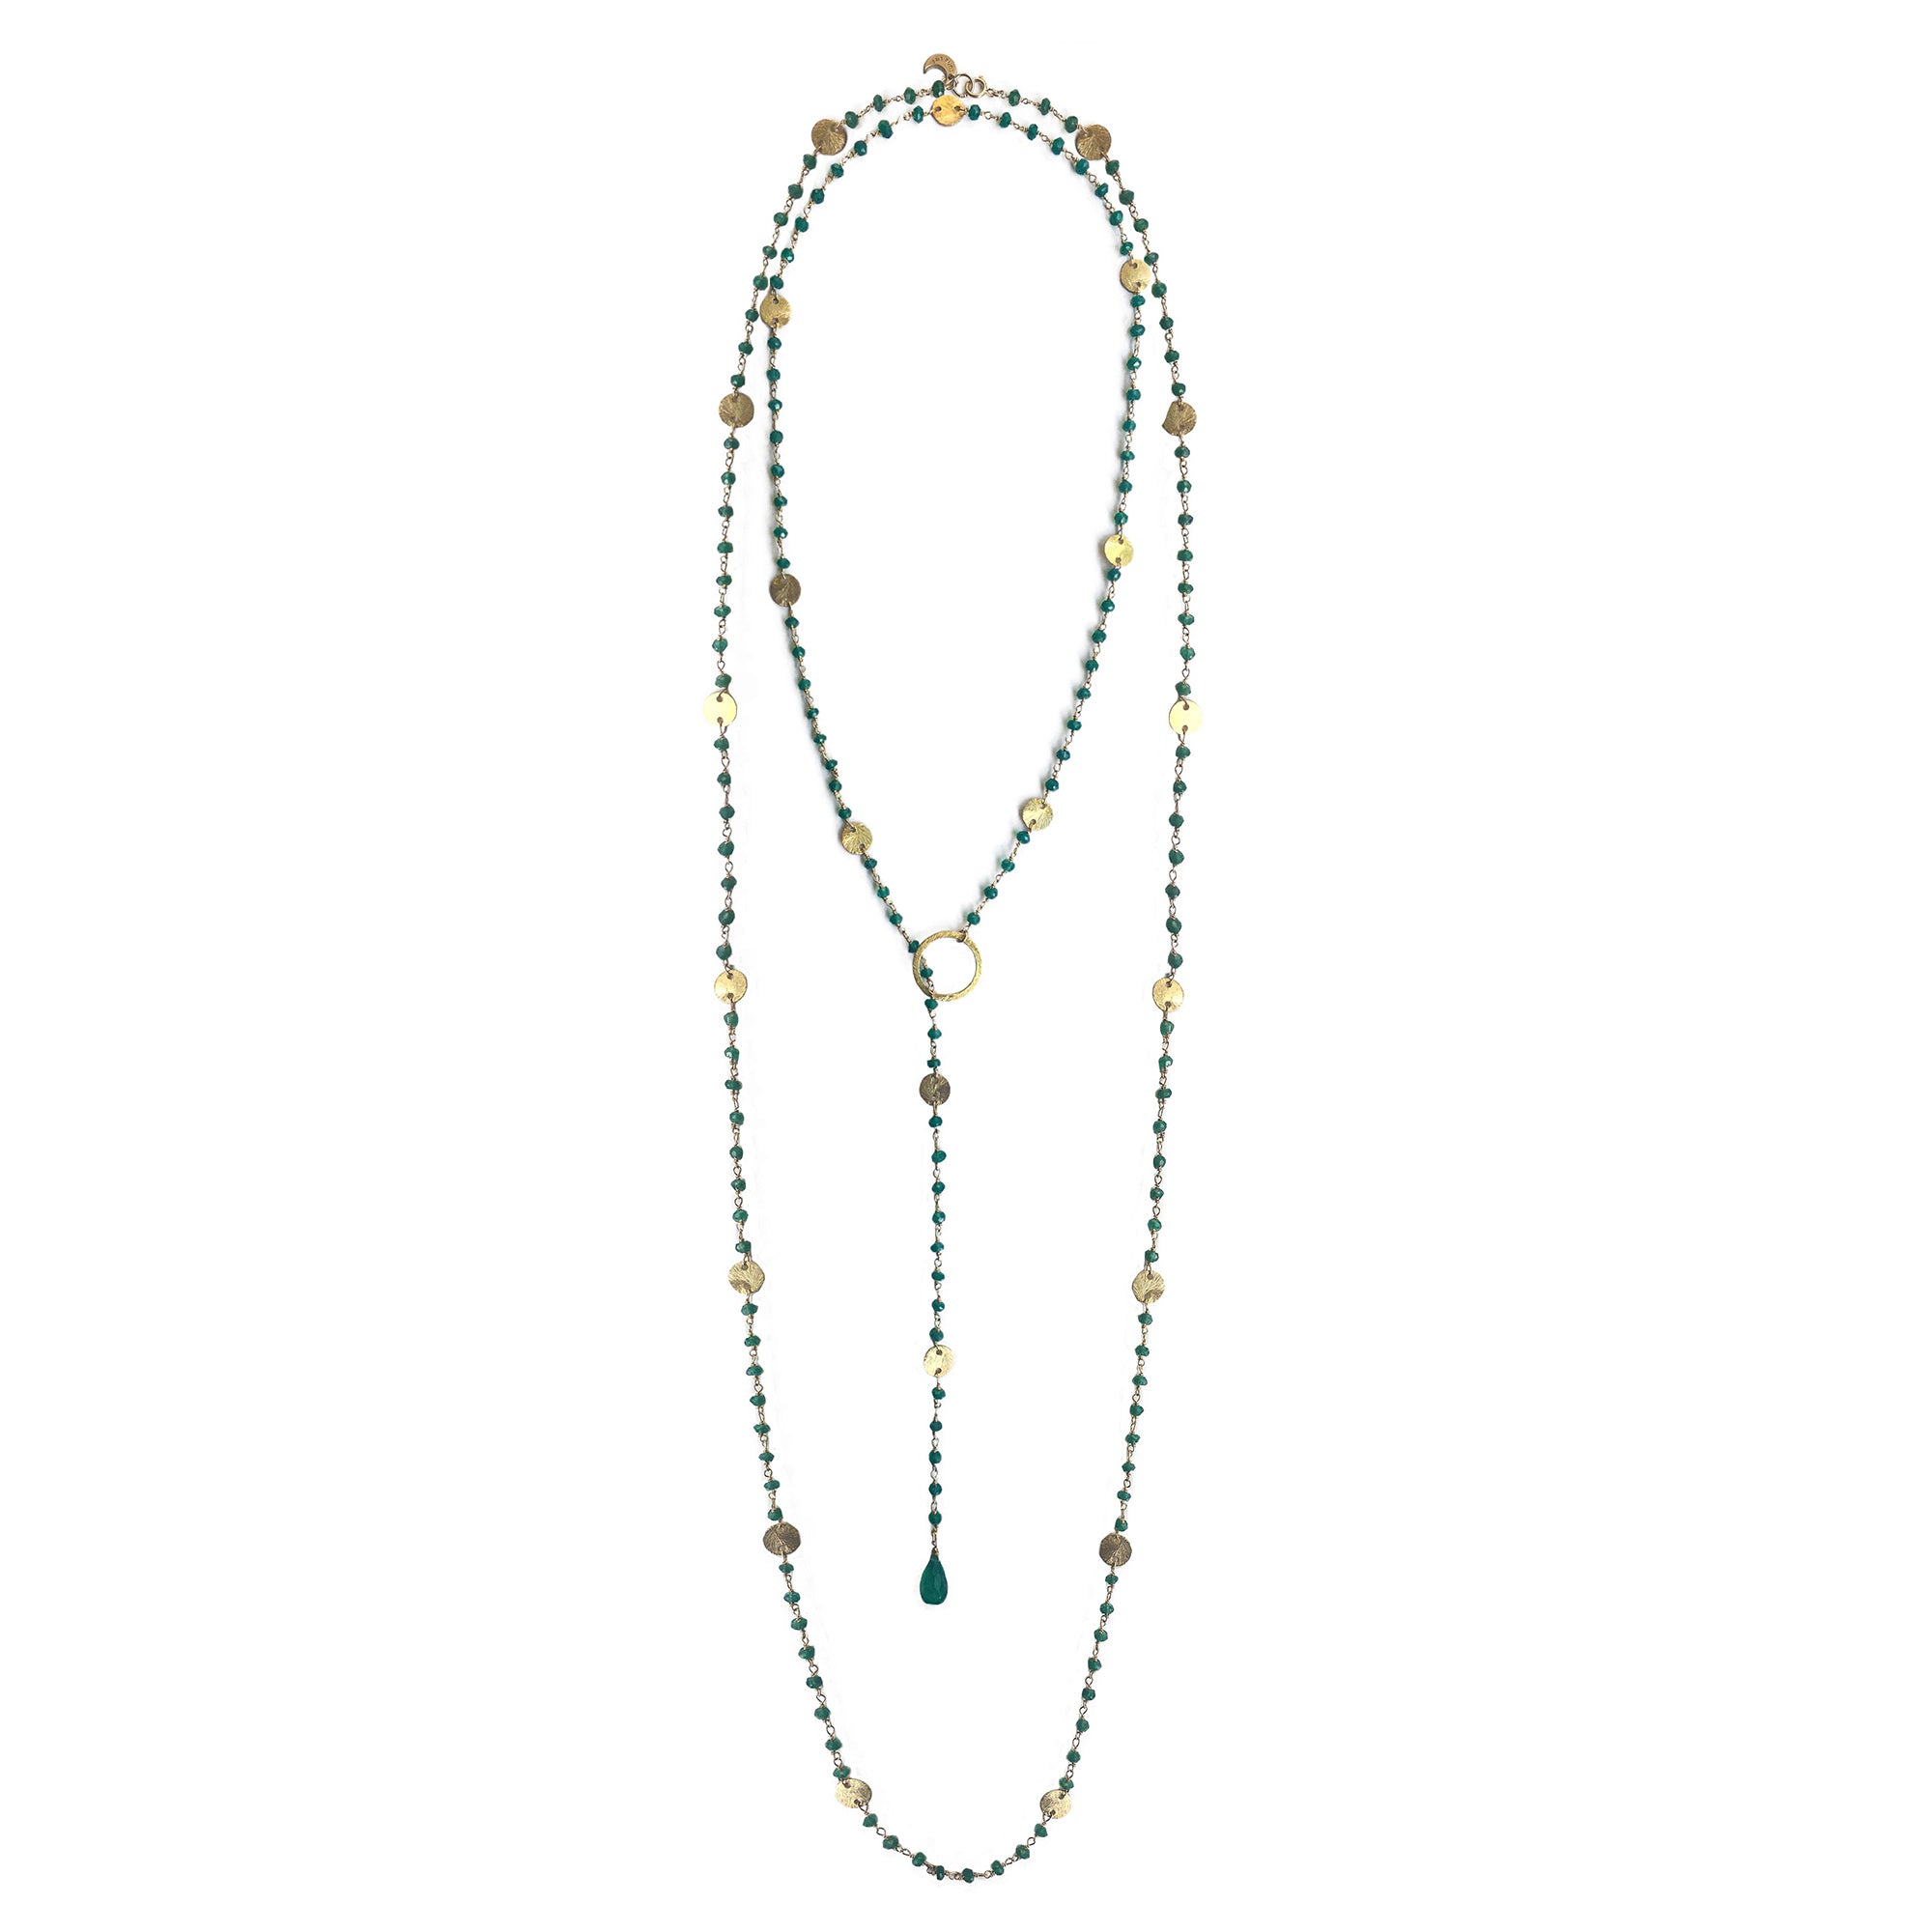 Green Onyx Necklaces